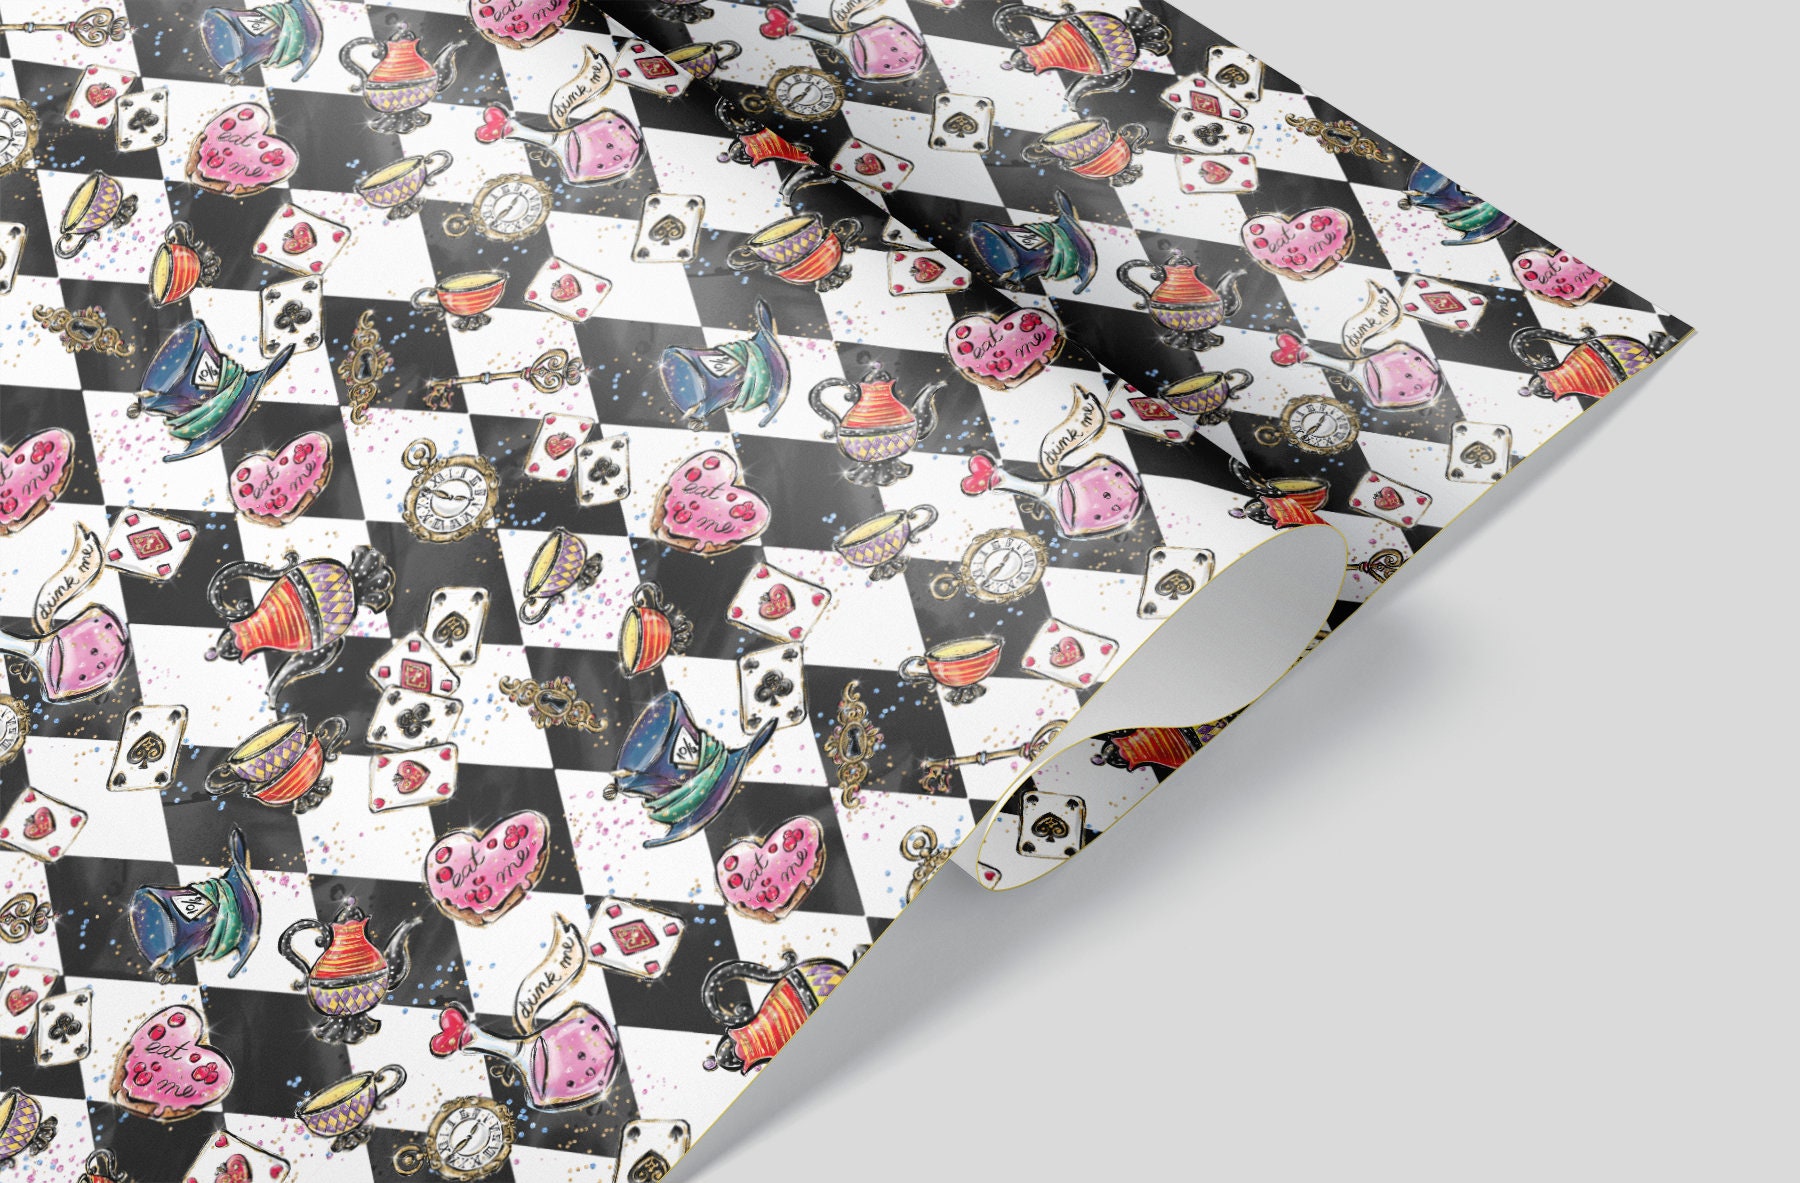 Alice in Wonderland Wrapping Paper Sheets sold by Pelican